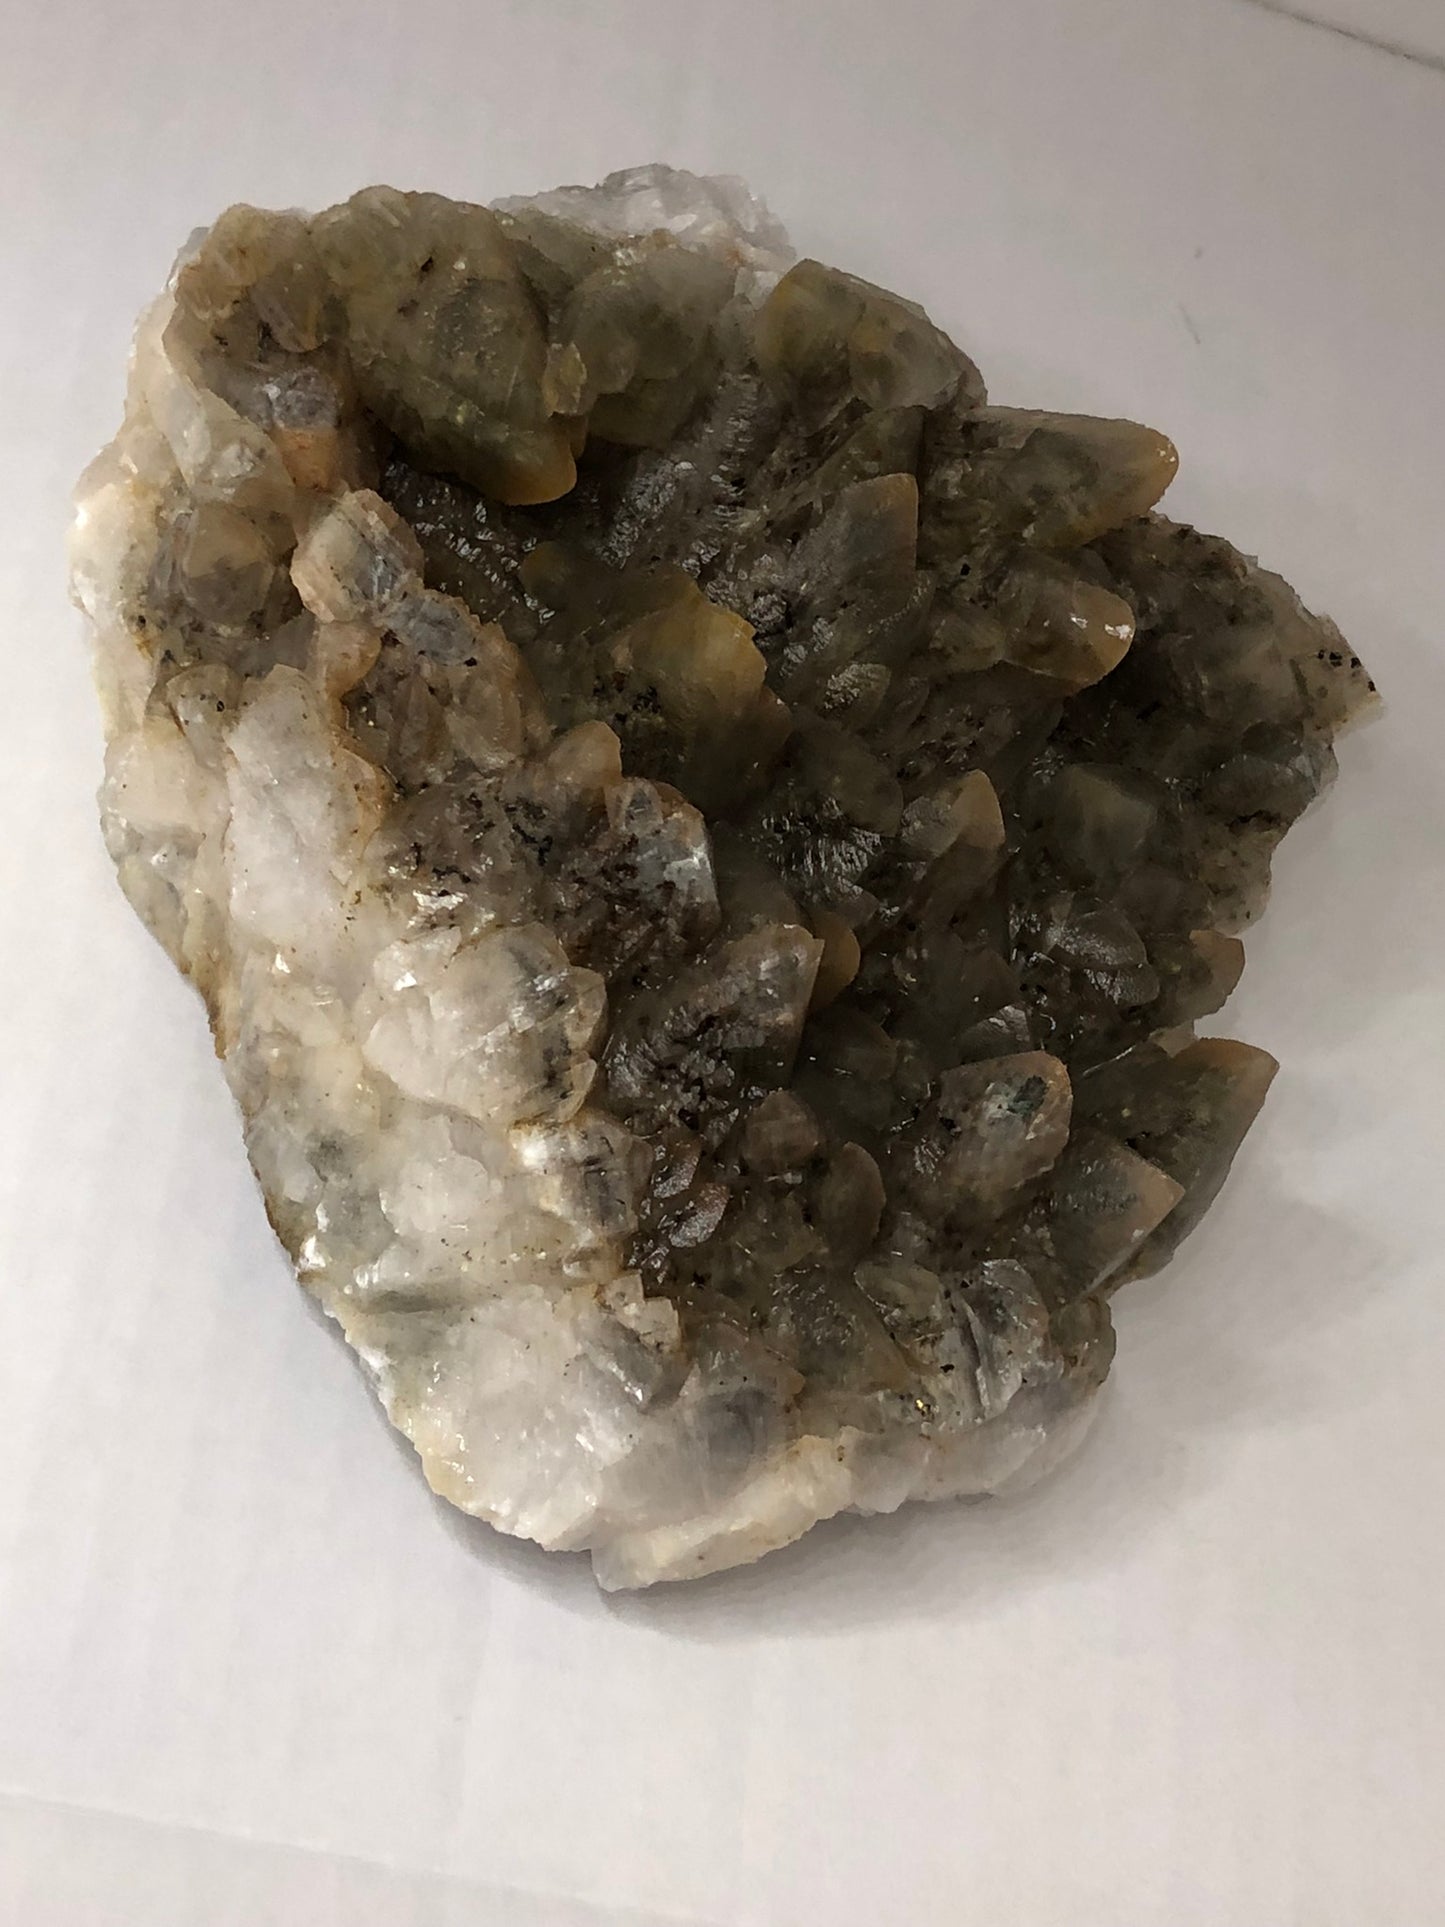 Dogs tooth calcite